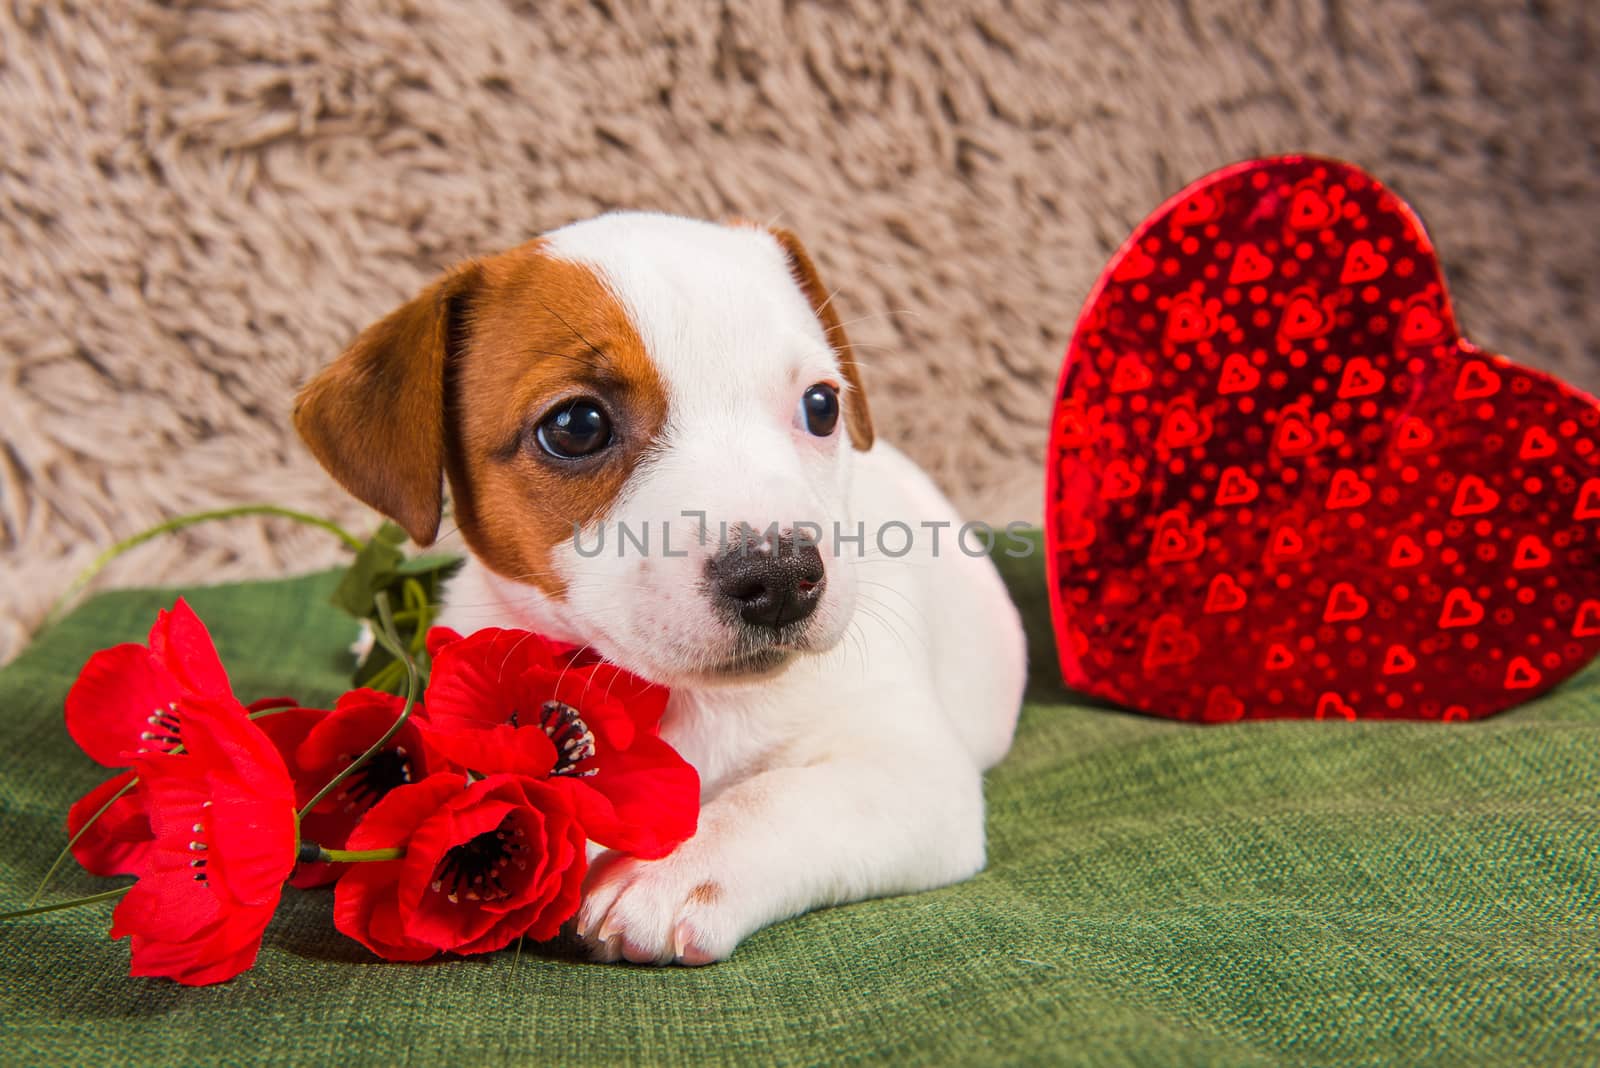 Jack Russell Terrier dog puppy are lying like an angel with red heart and flowers. Card on Valentine's Day.